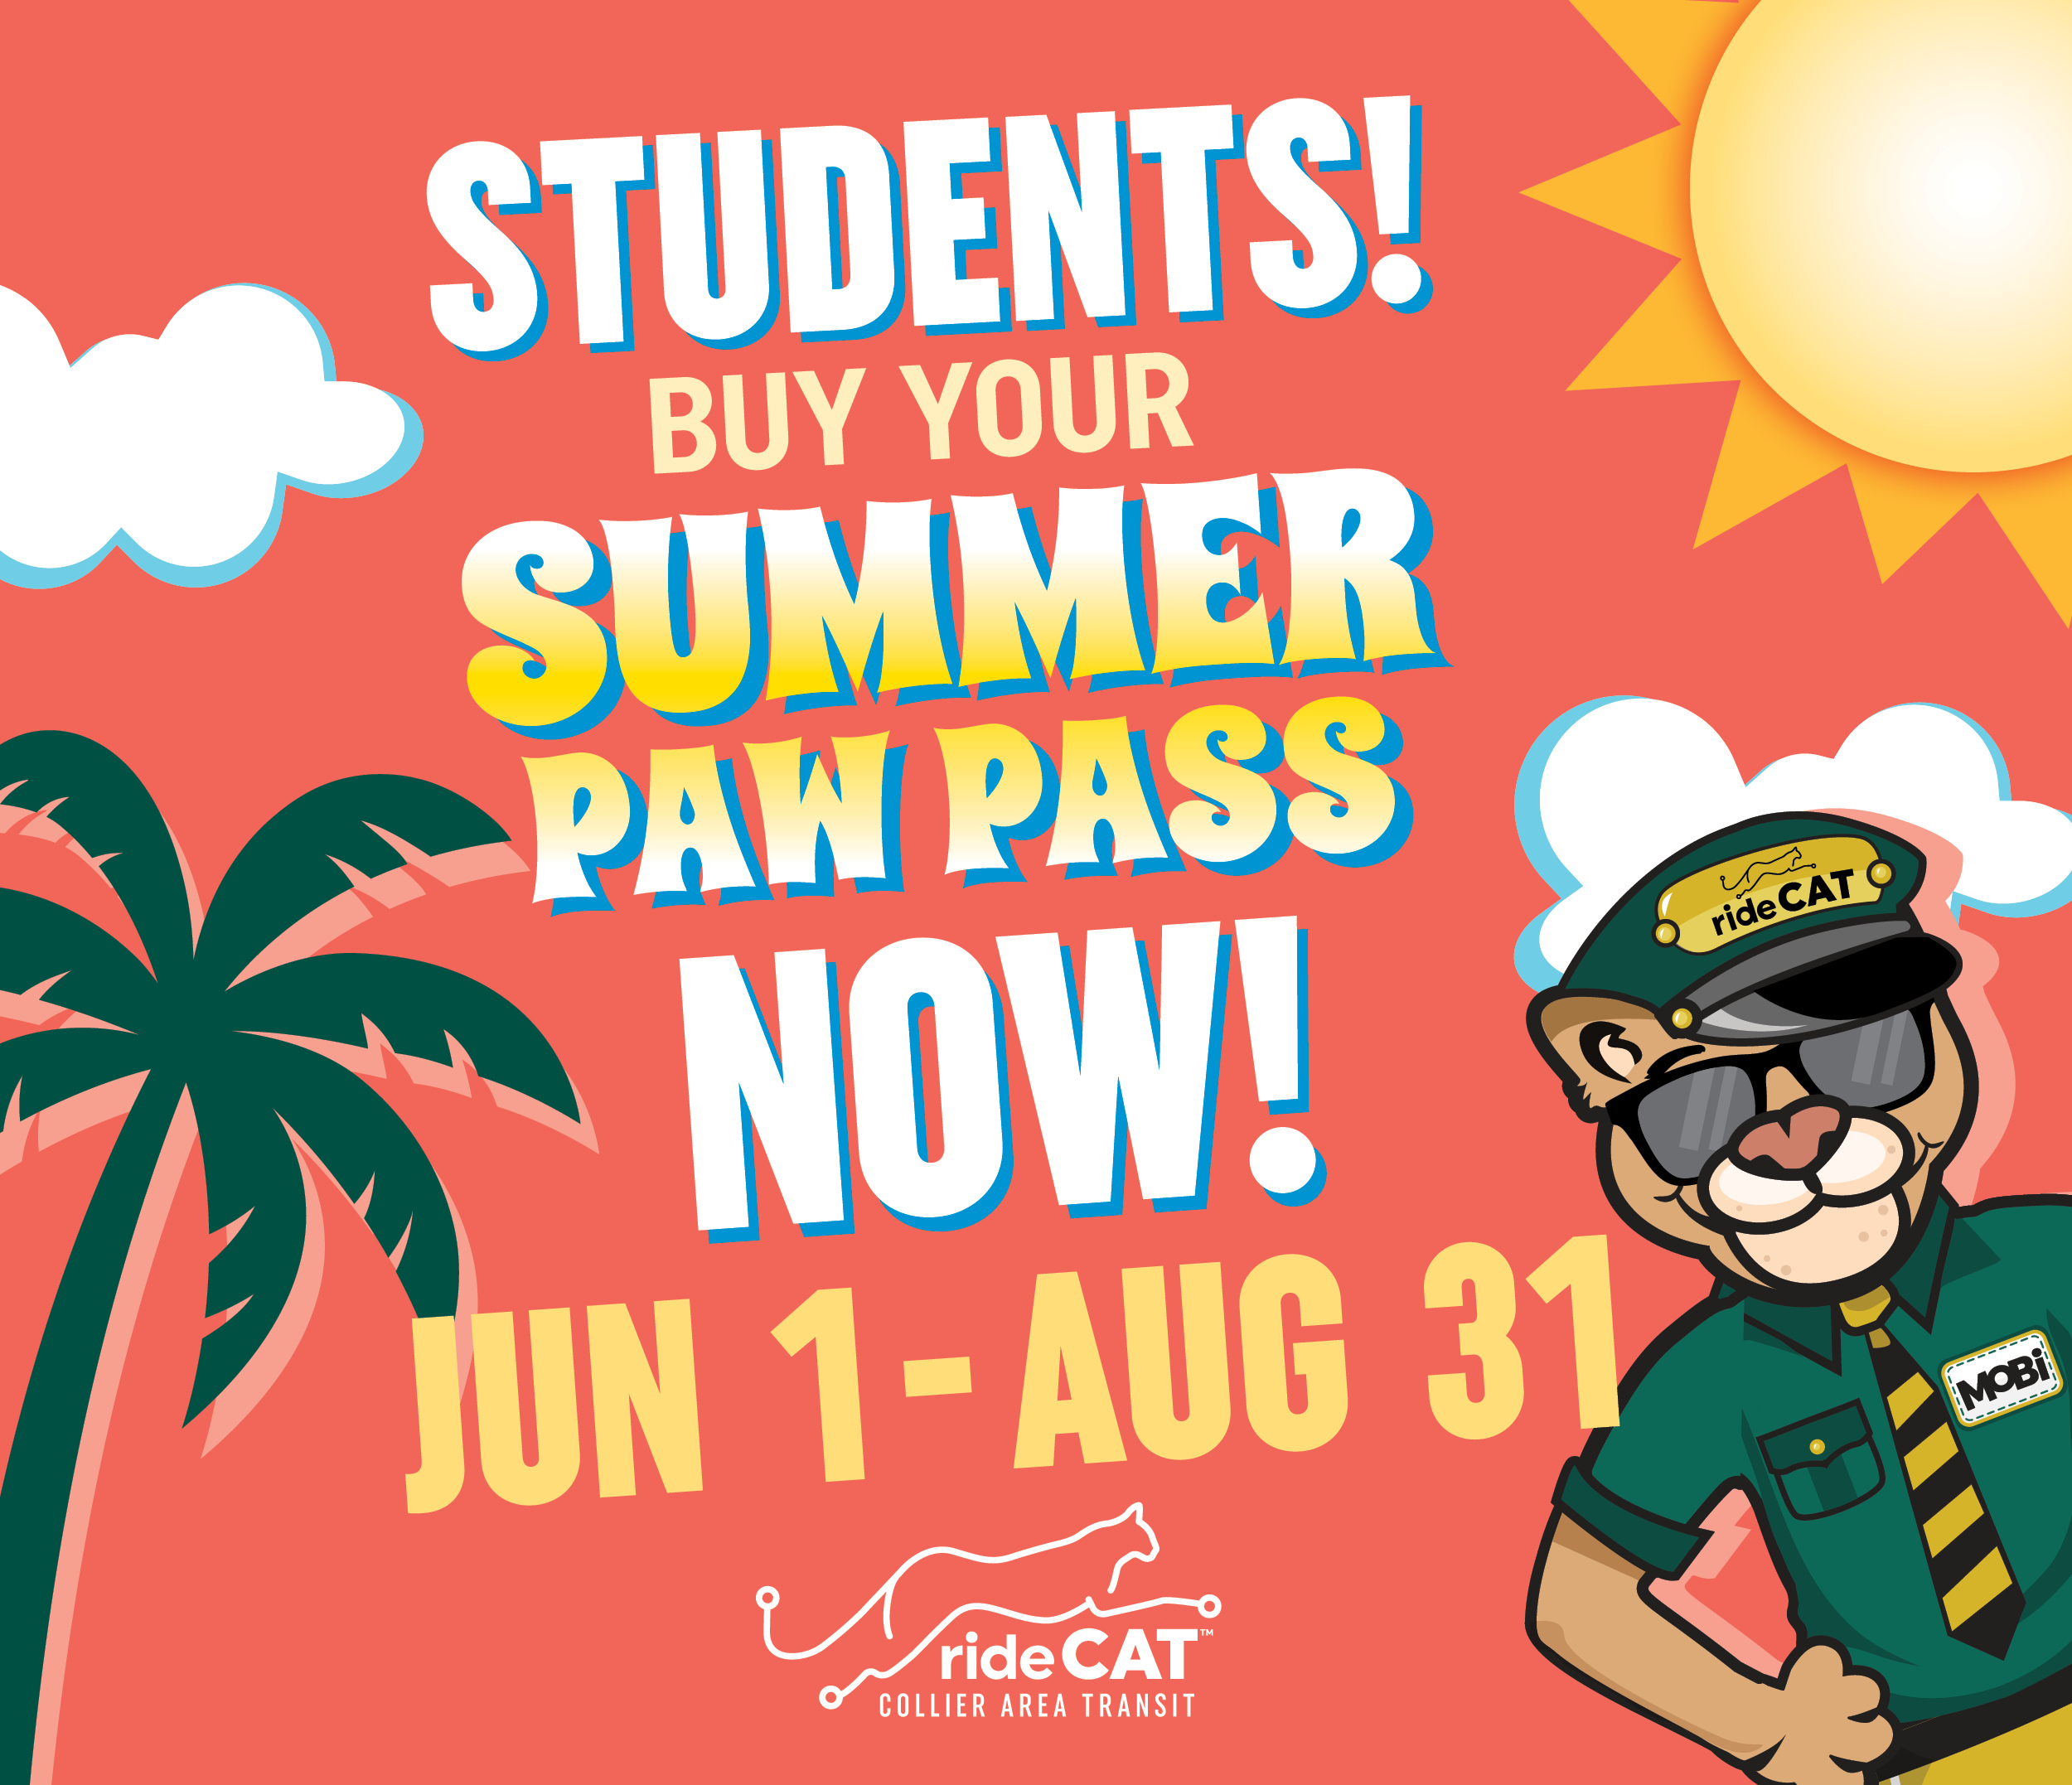 STUDENTS! Buy Your Summer Paw Pass!